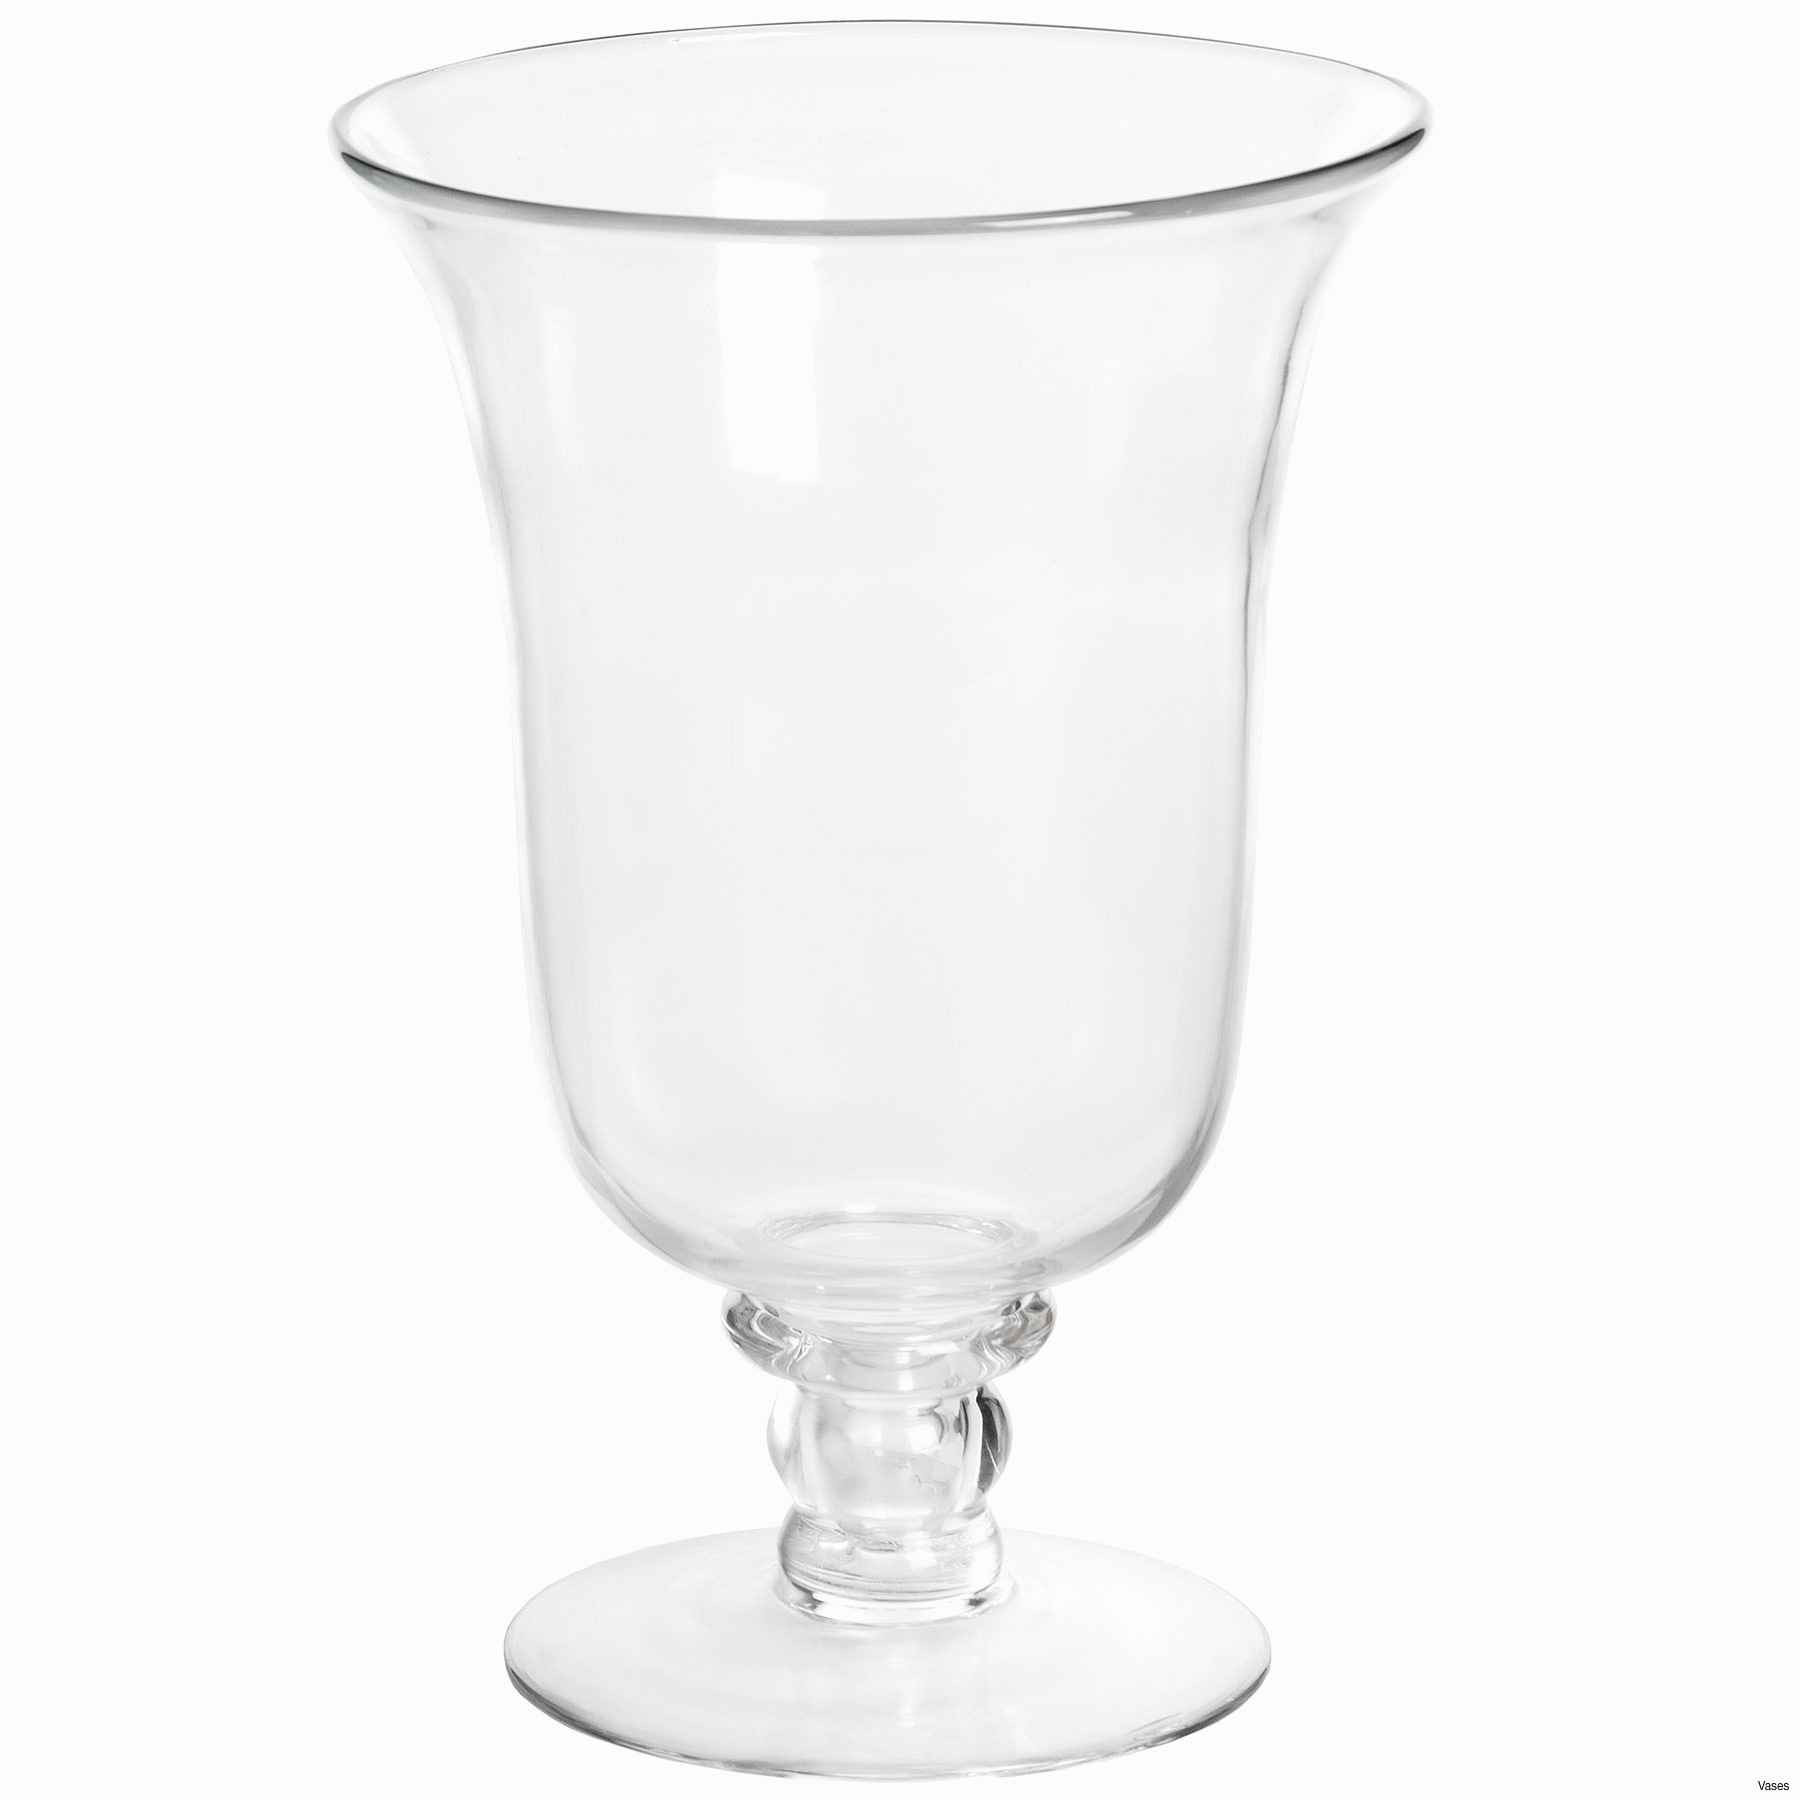 11 Unique Cheap Glass Flower Vases 2024 free download cheap glass flower vases of candle stands wholesale lovely faux crystal candle holders alive pertaining to candle stands wholesale lovely faux crystal candle holders alive vases gold tall jp